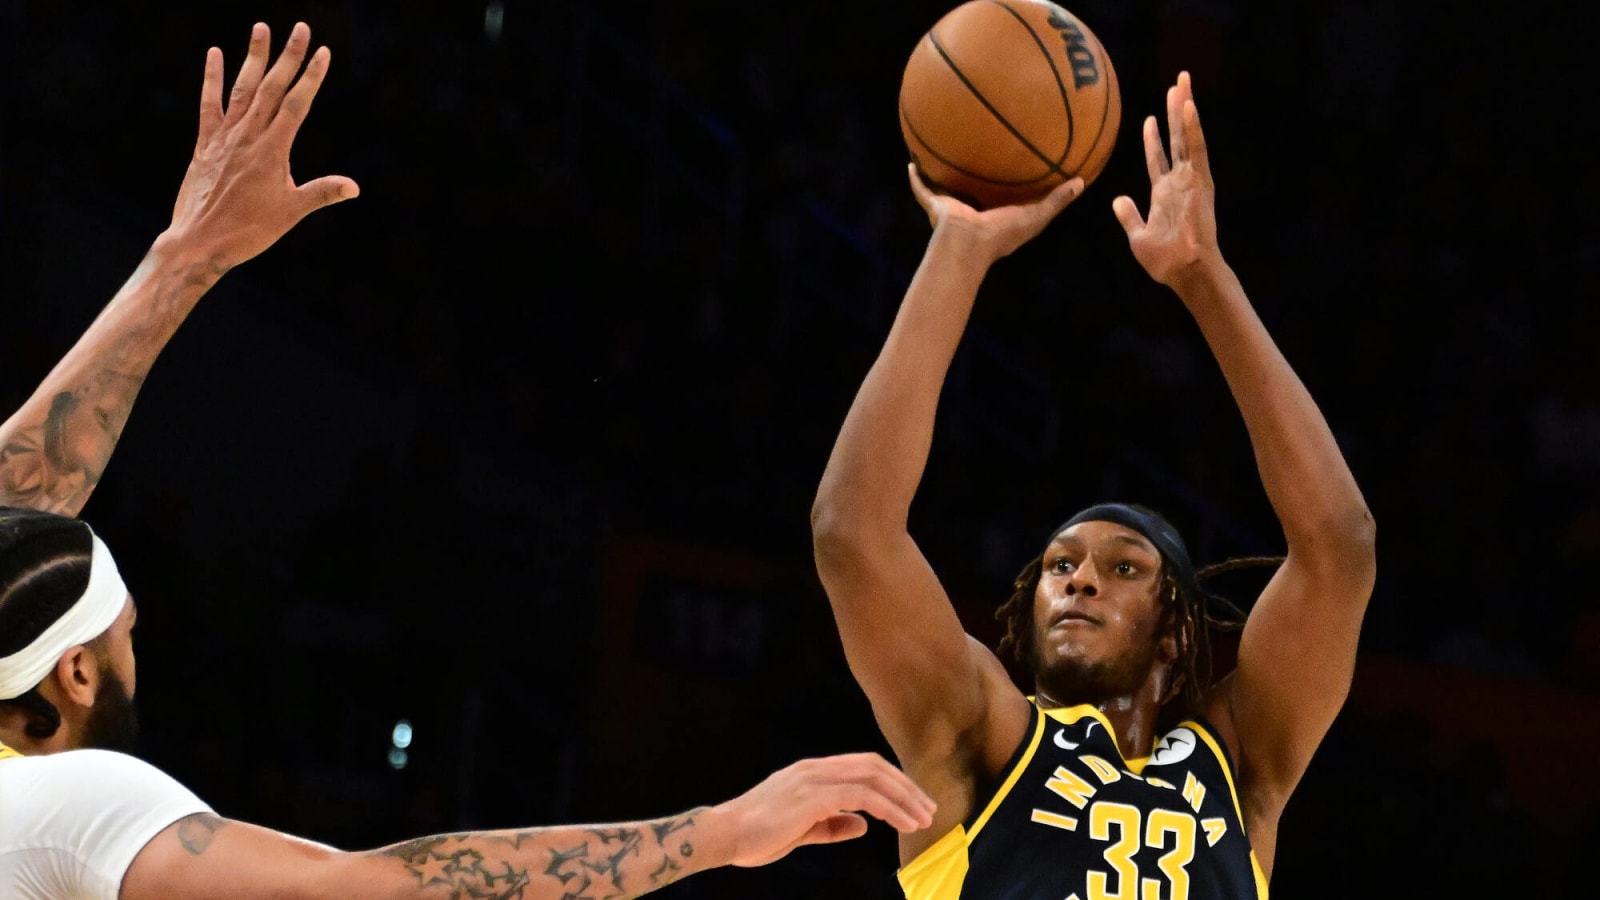 Myles Turner Opens Up On Playing Against The Lakers And Clippers While Being Linked With A Trade